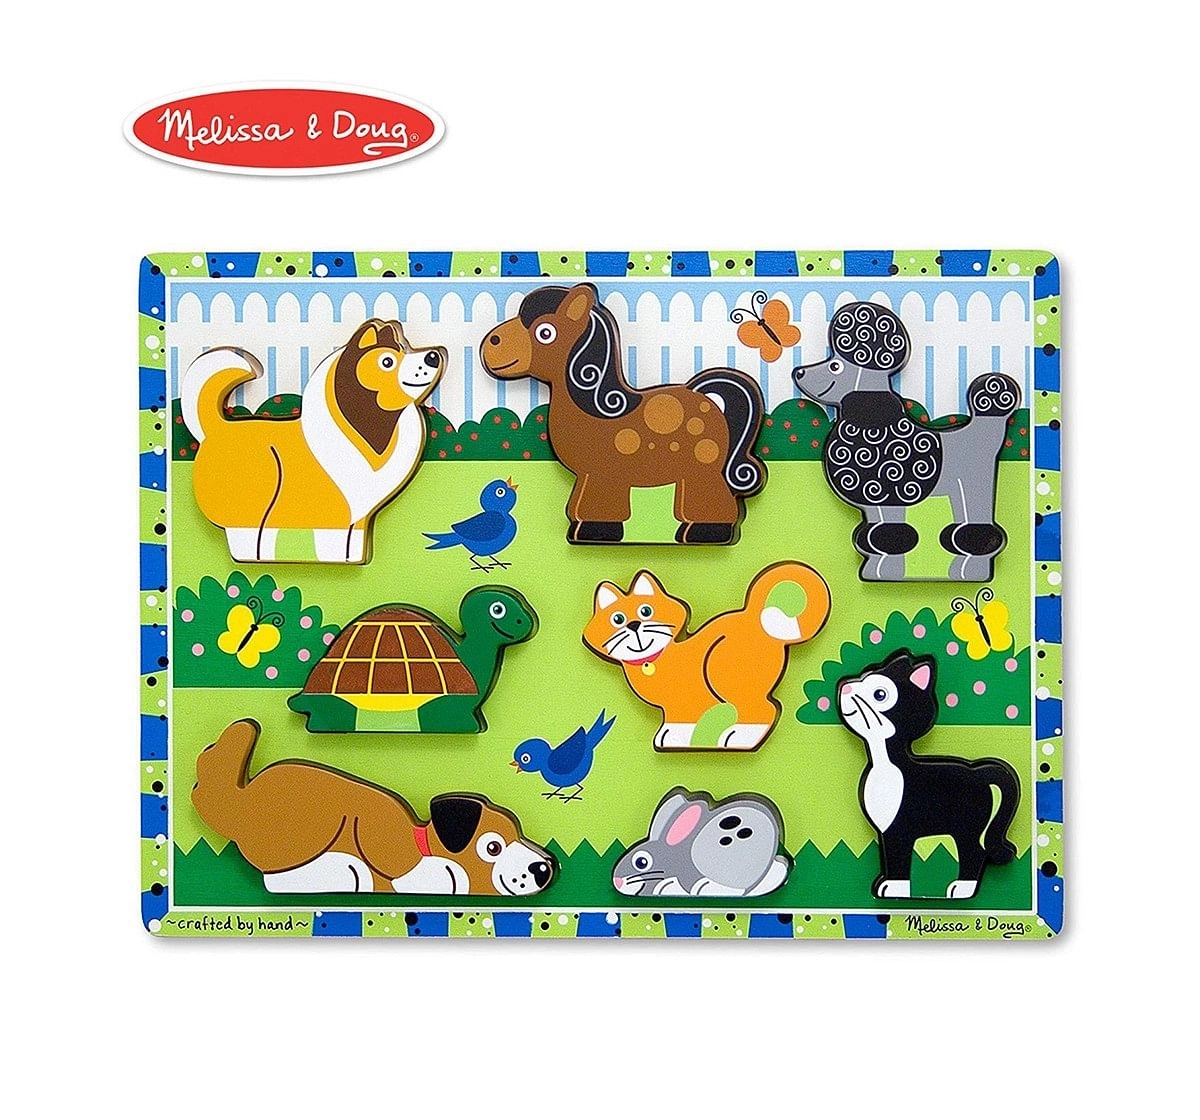 Melissa & Doug Pets Chunky Puzzle, Multi Color Wooden Toys for Kids age 3Y+ 